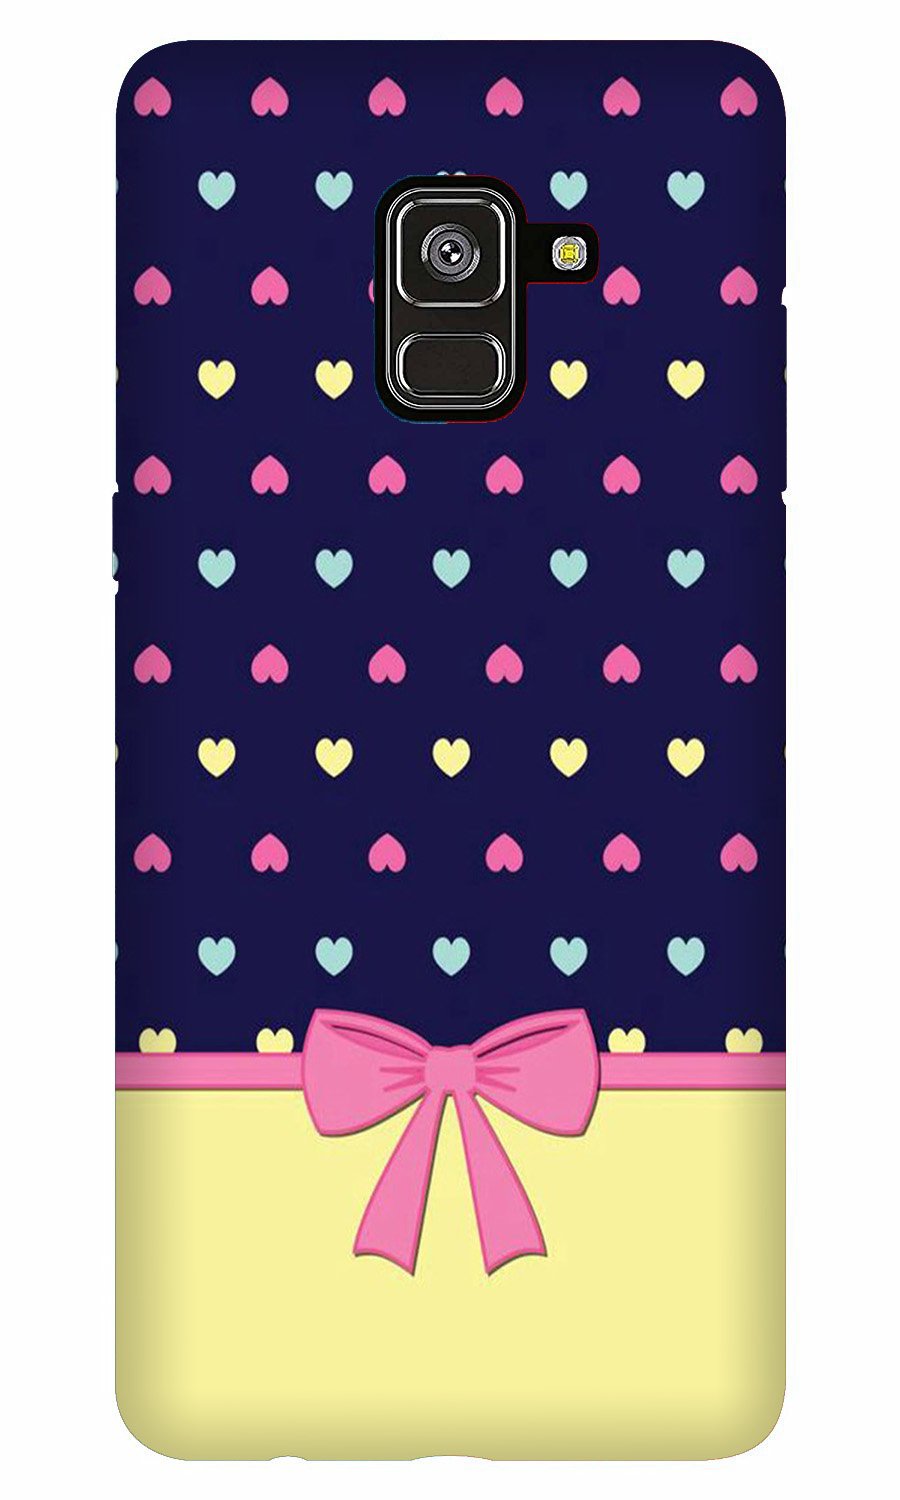 Gift Wrap5 Case for Galaxy A5 (2018)